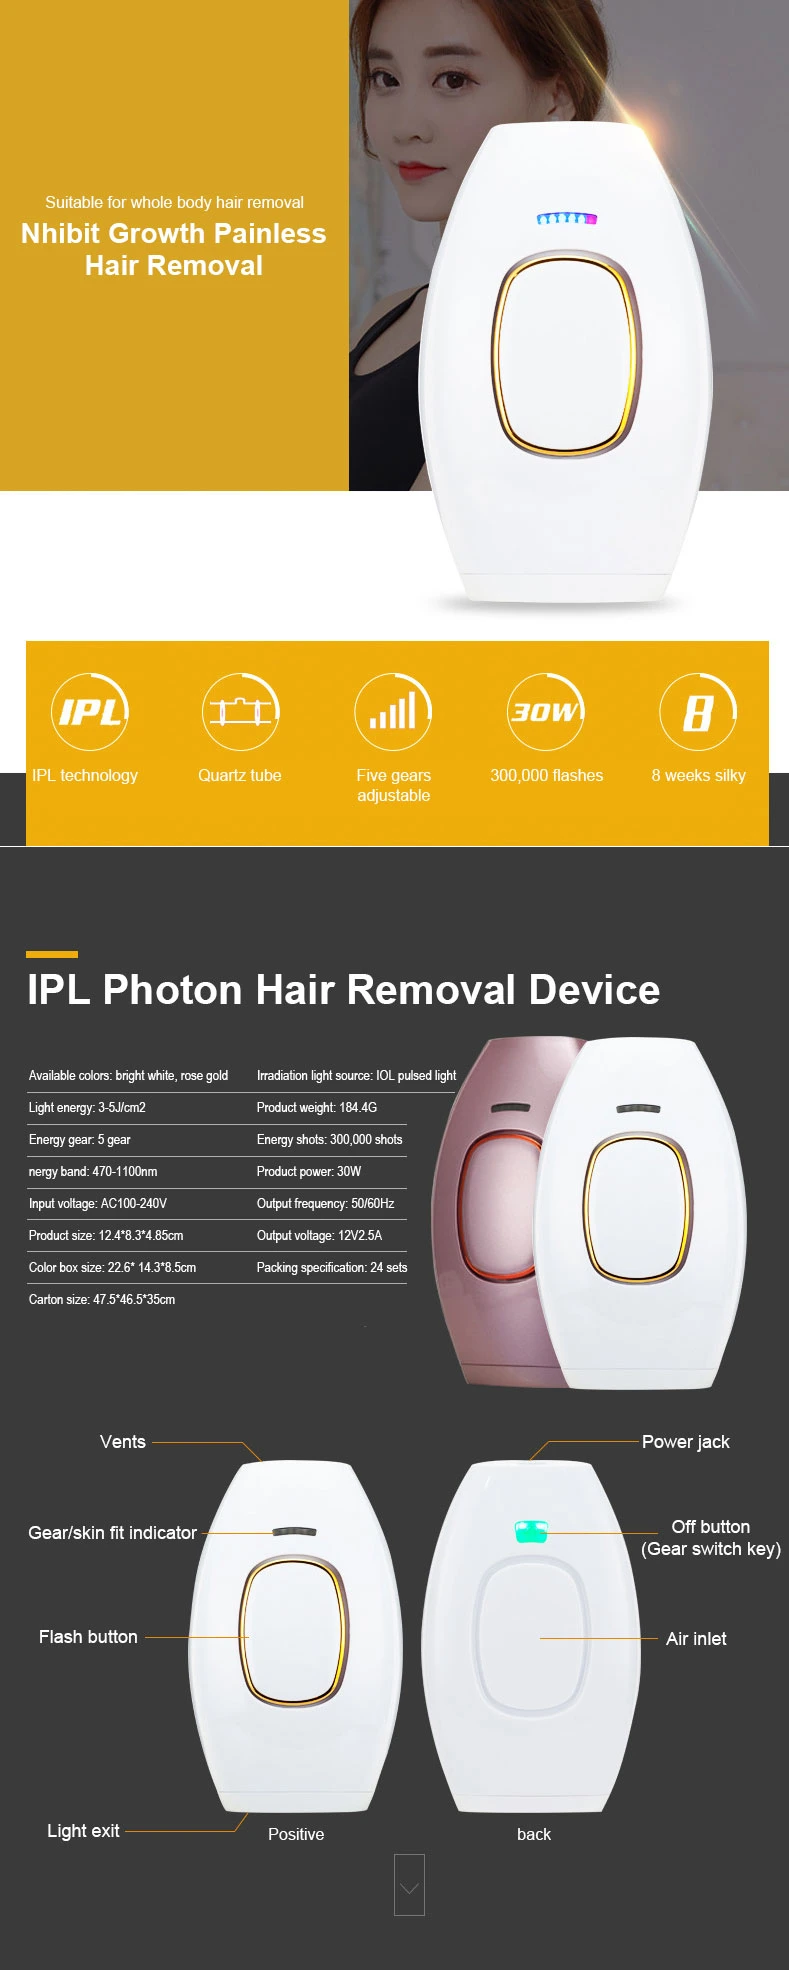 Handheld Home Use Flashes Laser Painless Cordless Hair Remover Device Laser IPL Hair Removal